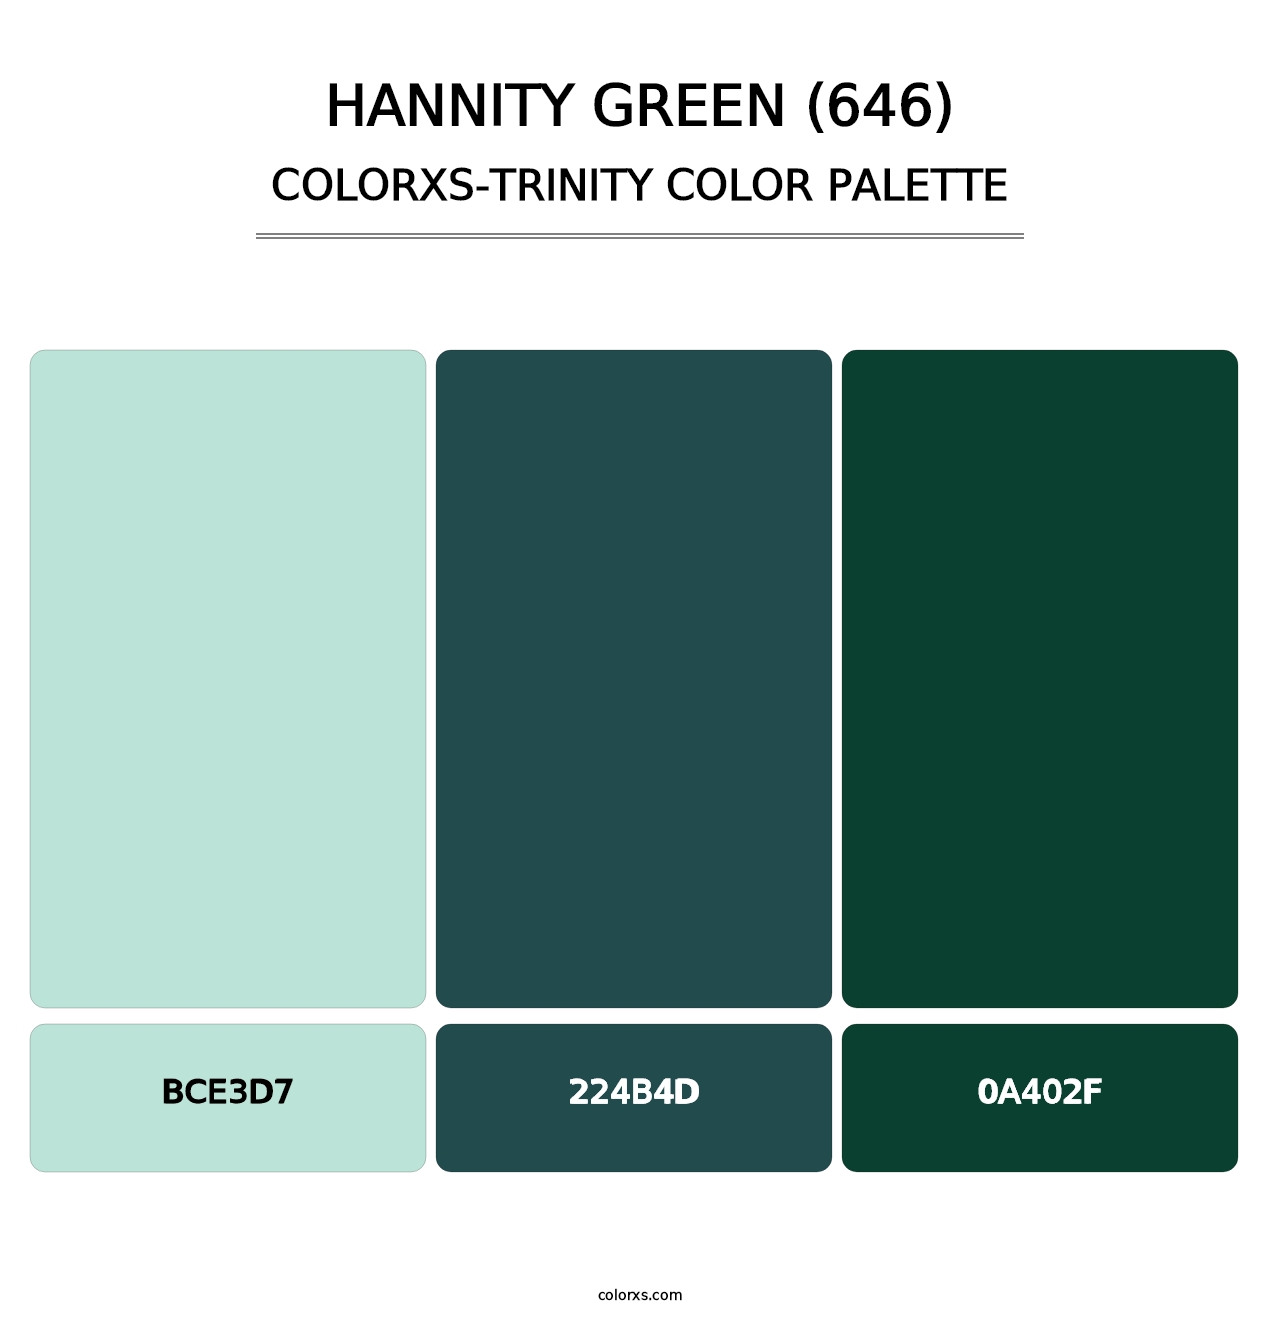 Hannity Green (646) - Colorxs Trinity Palette